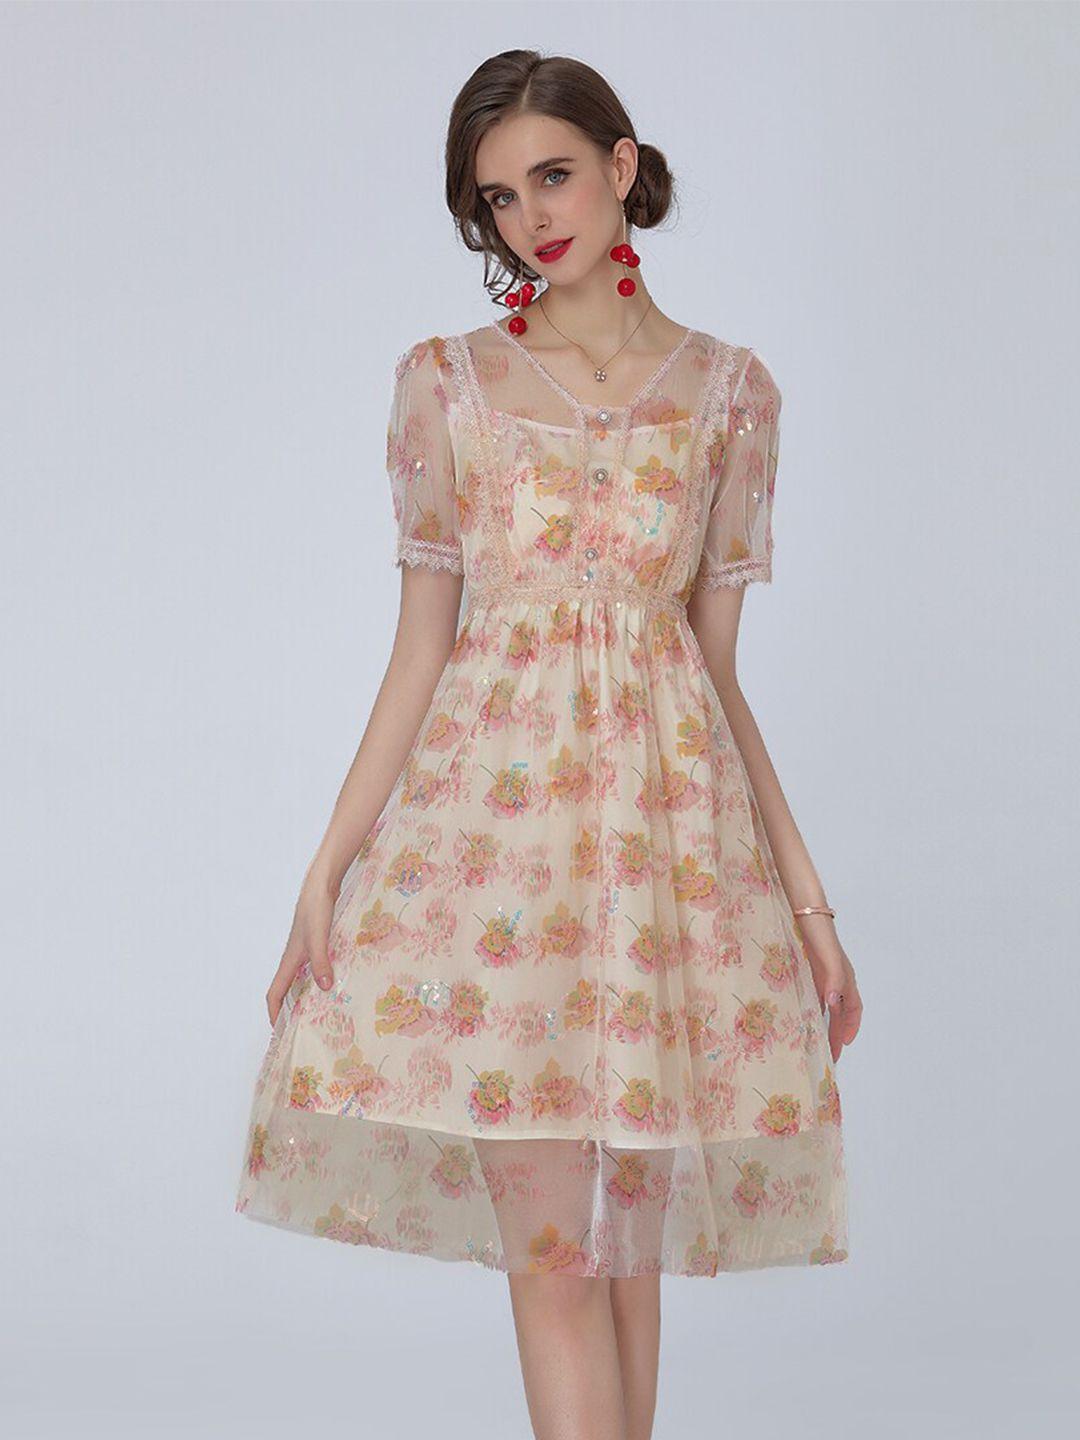 jc collection women pink & yellow floral printed dresses